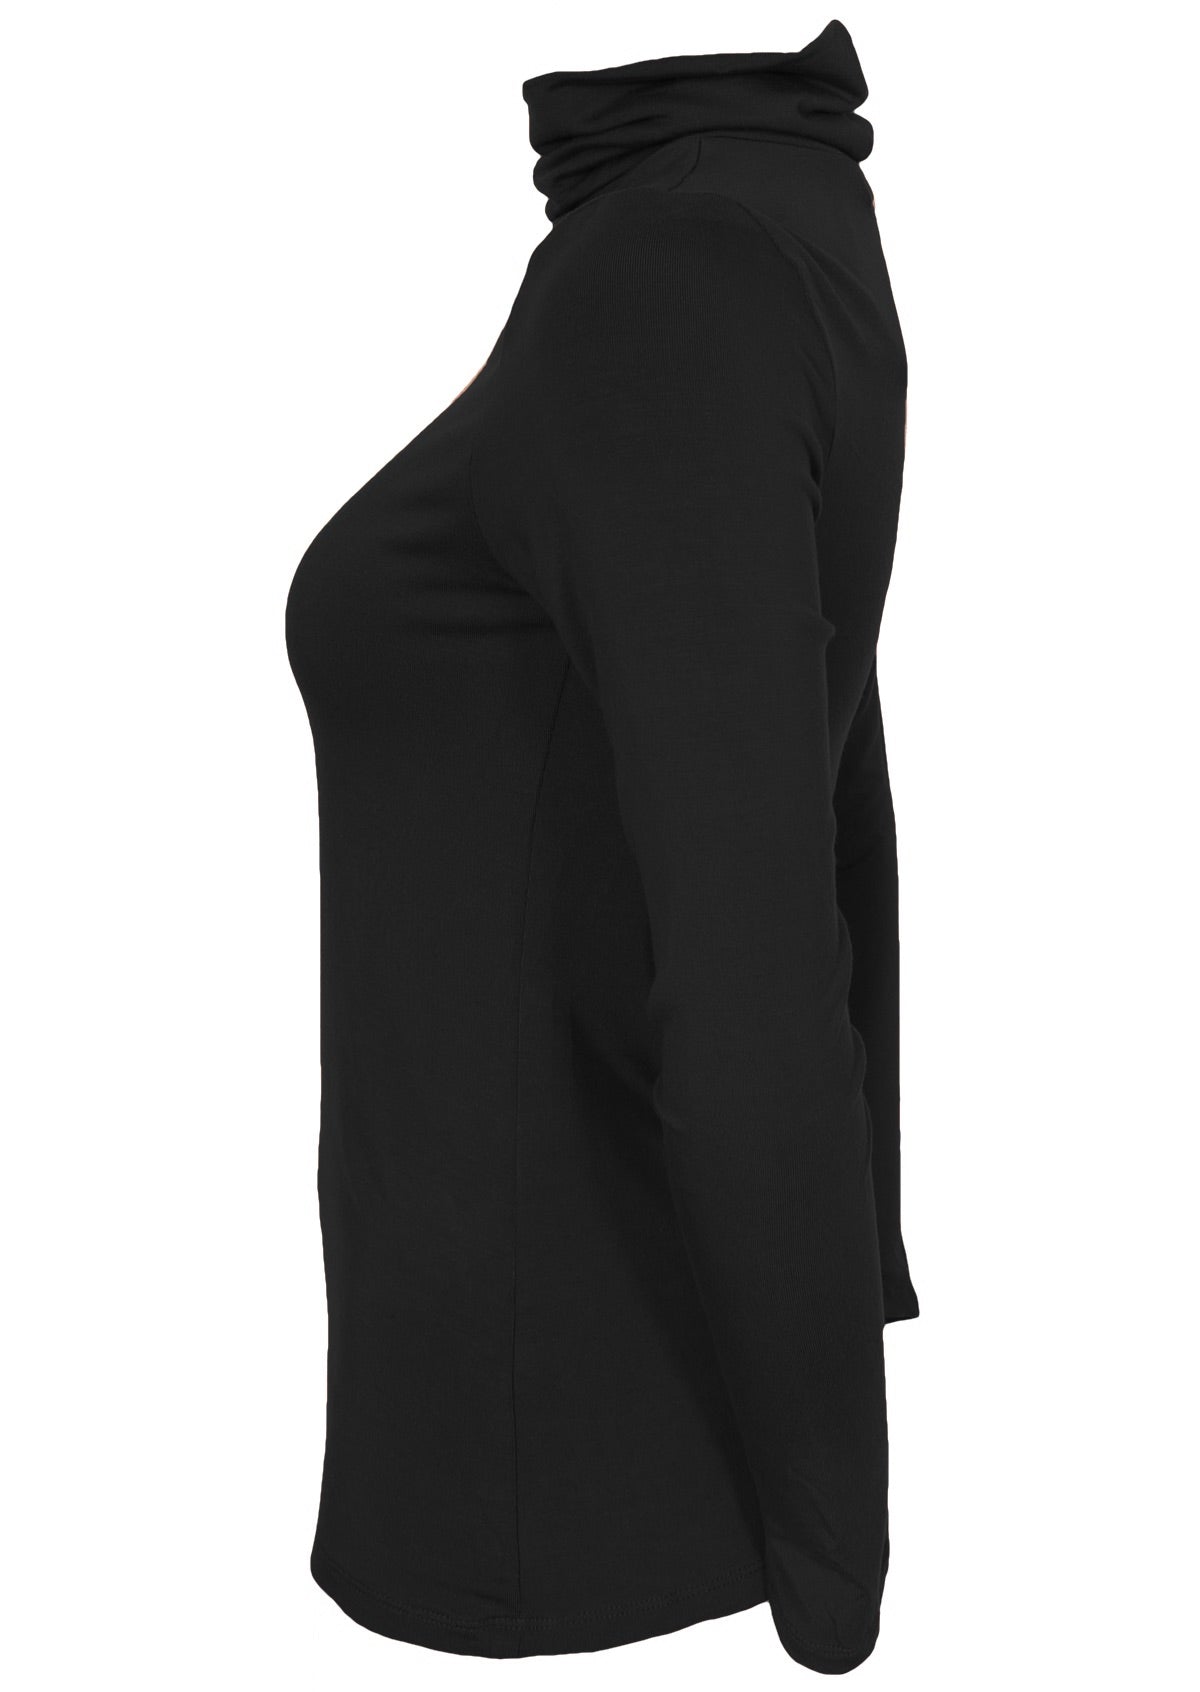 Side view of women's turtle neck black fitted long sleeve soft stretch rayon top.